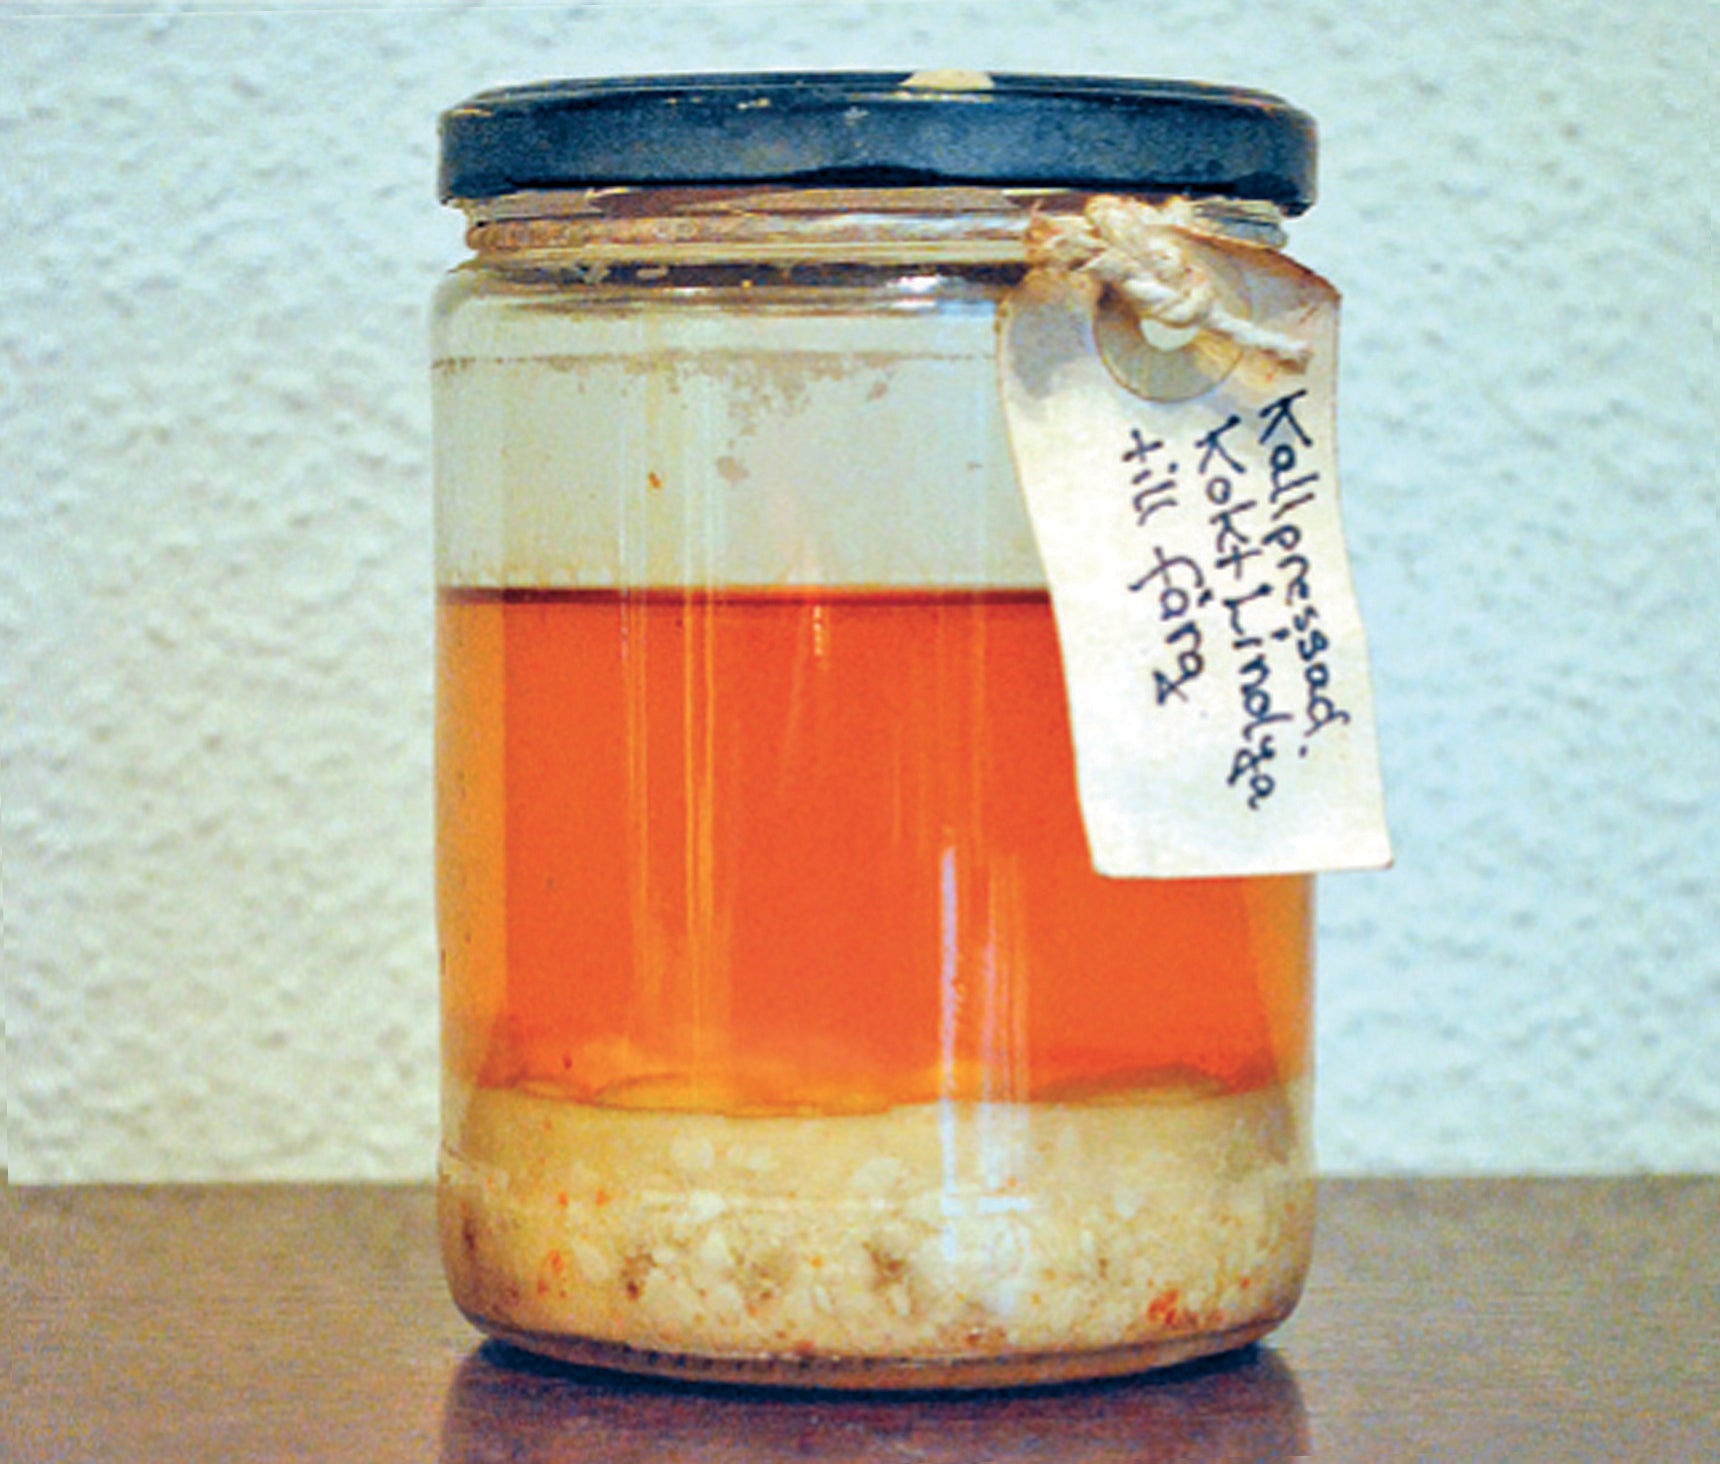 Allbäck Purified Linseed Oil protein